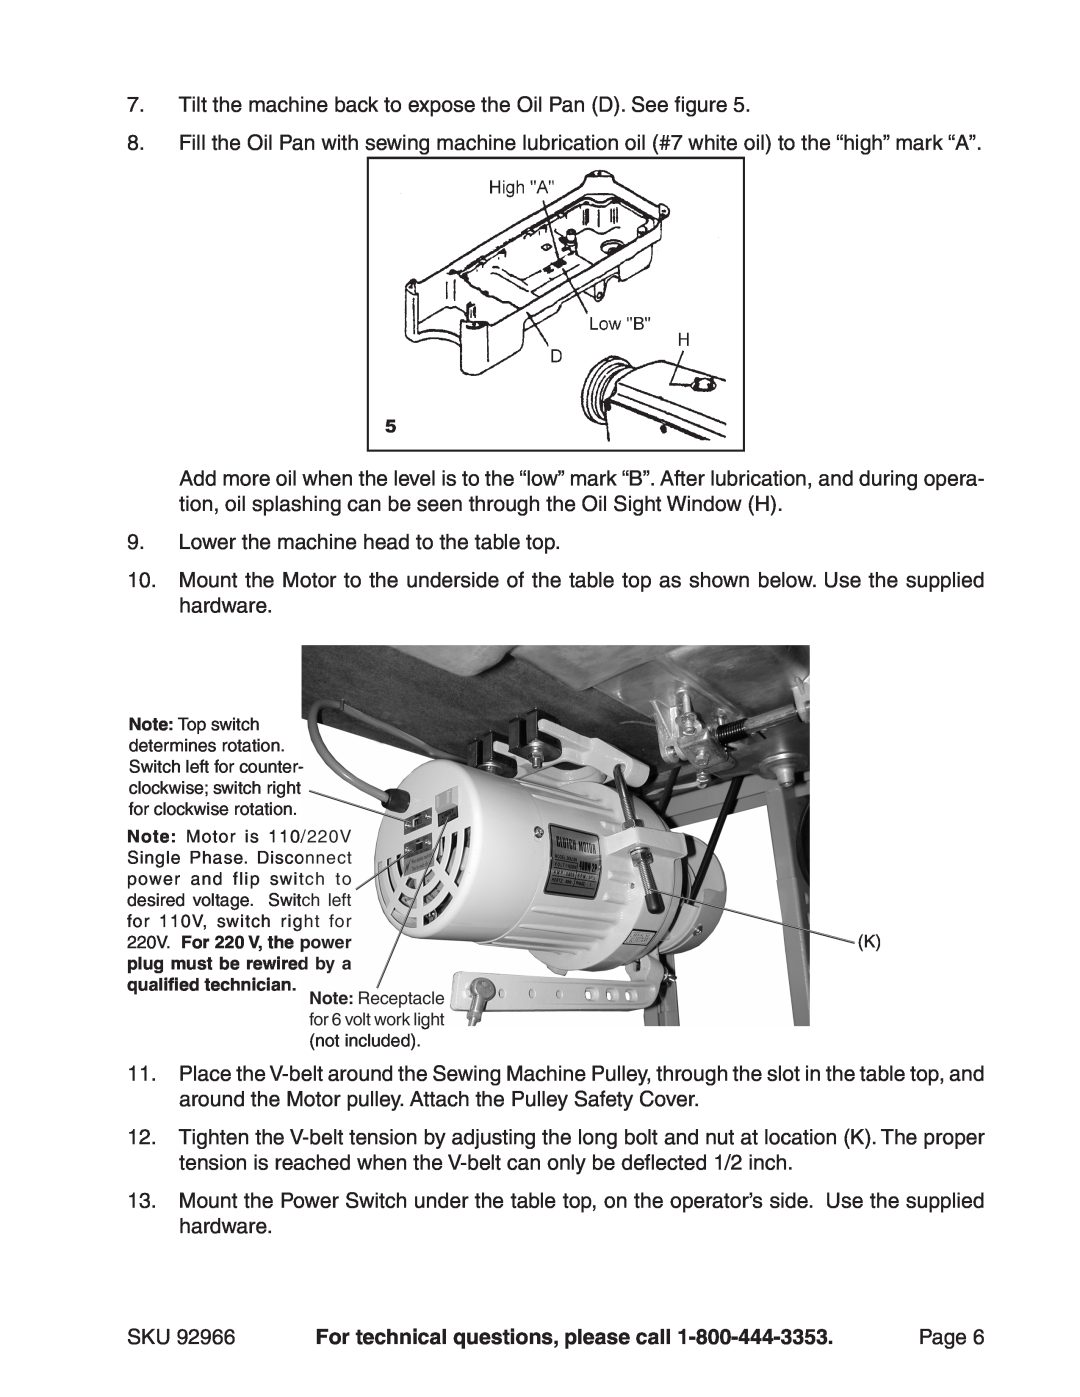 Harbor Freight Tools 92966 Tilt the machine back to expose the Oil Pan D. See figure, For technical questions, please call 